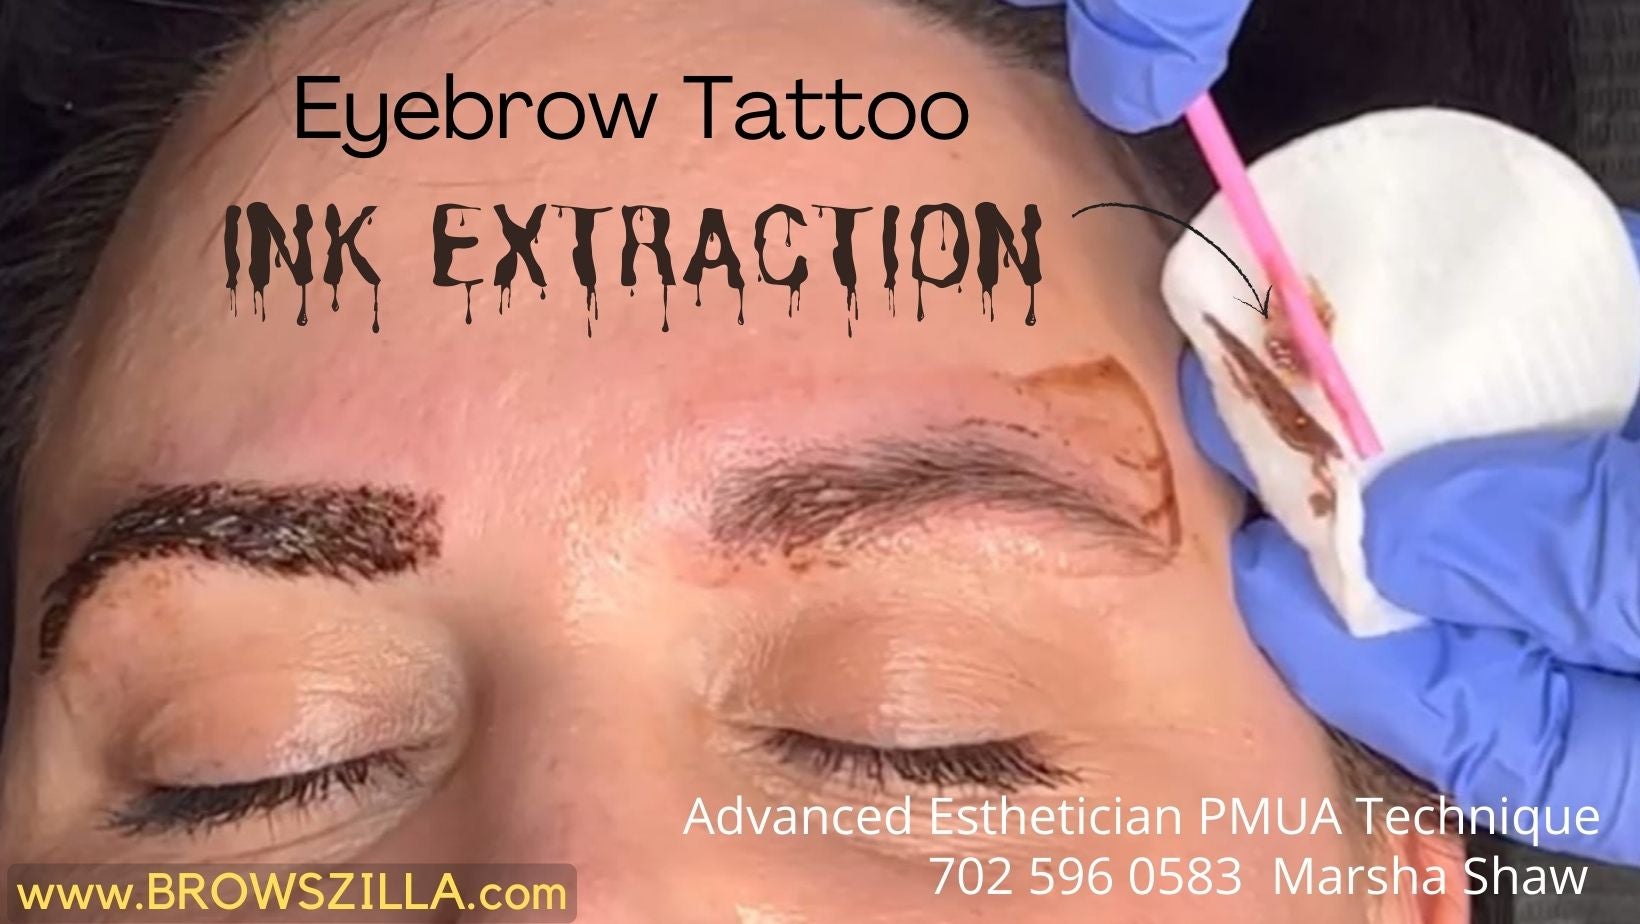 MICROBLADING TATTOO REMOVAL SERVICE